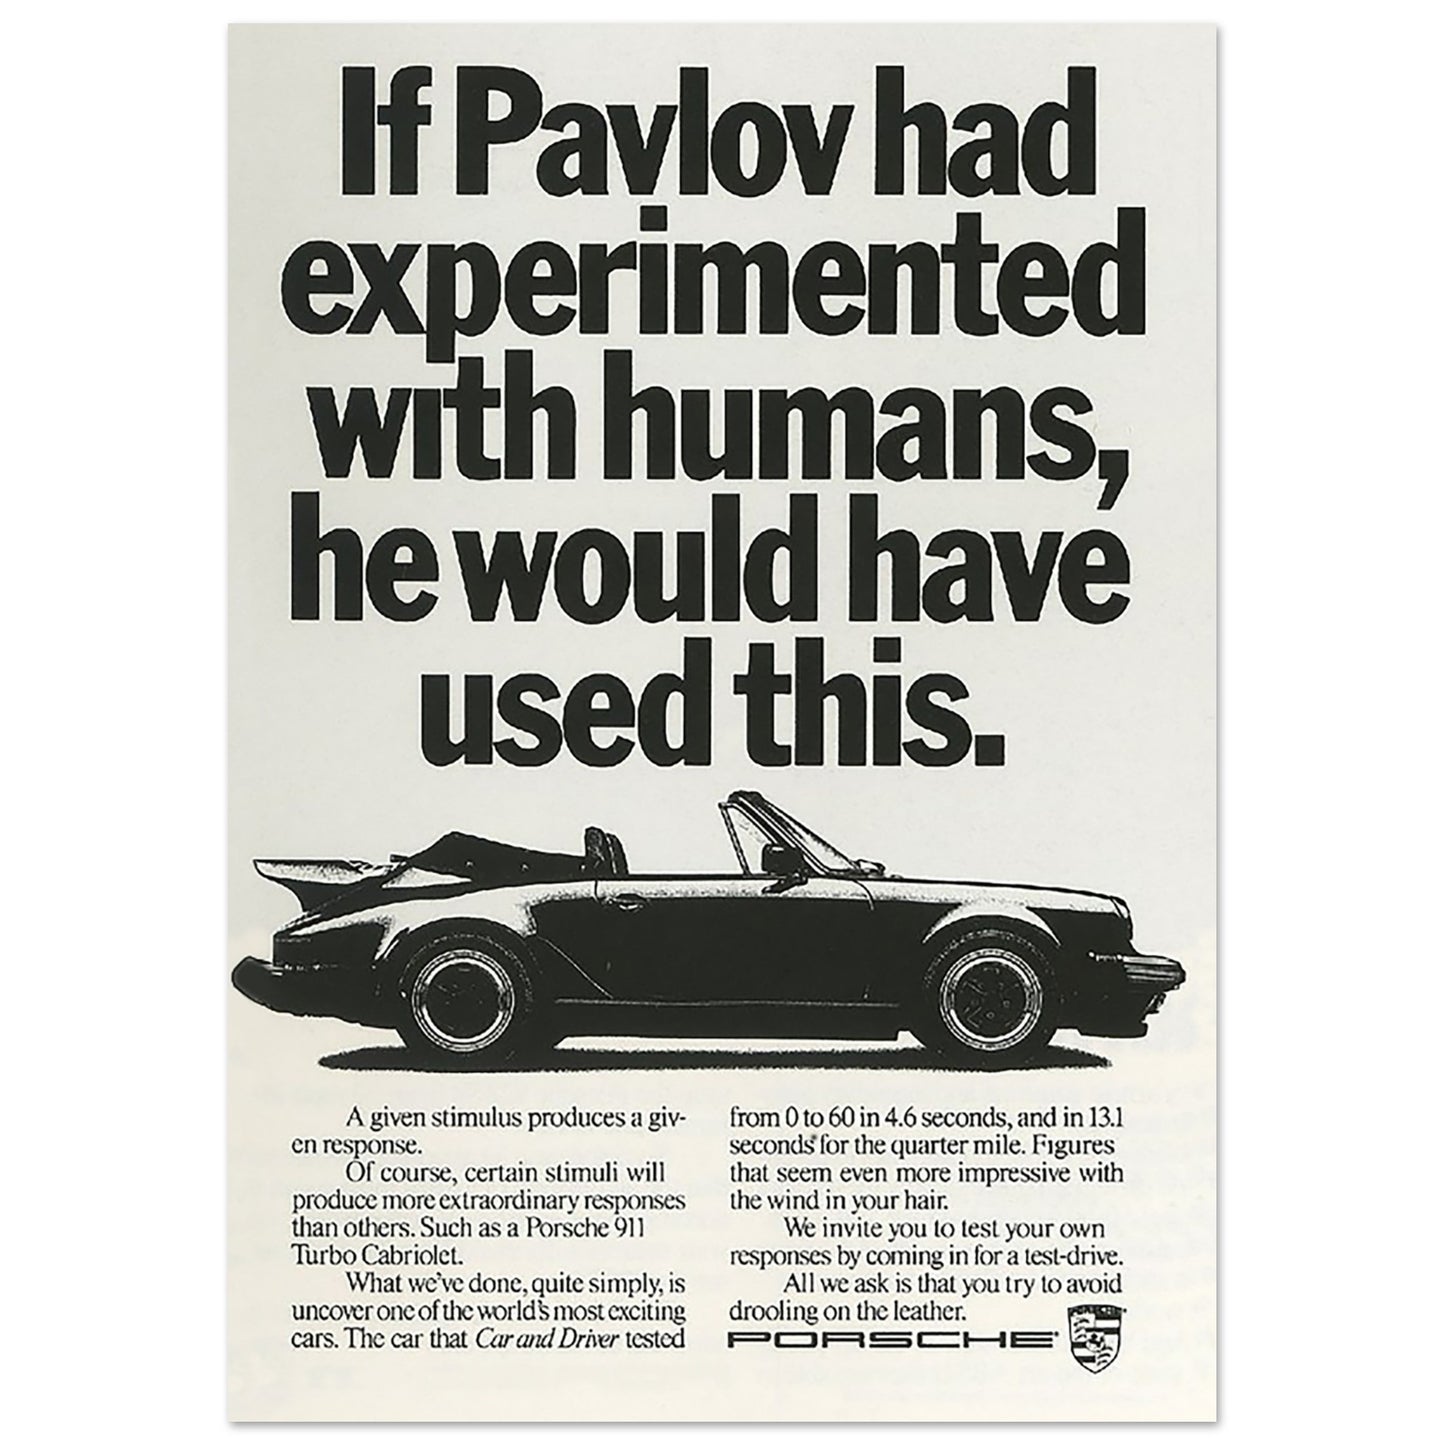 Porsche 911 Turbo Cabriolet Vintage Ad Poster: "If Pavlov had experimented with humans, he would have used this."